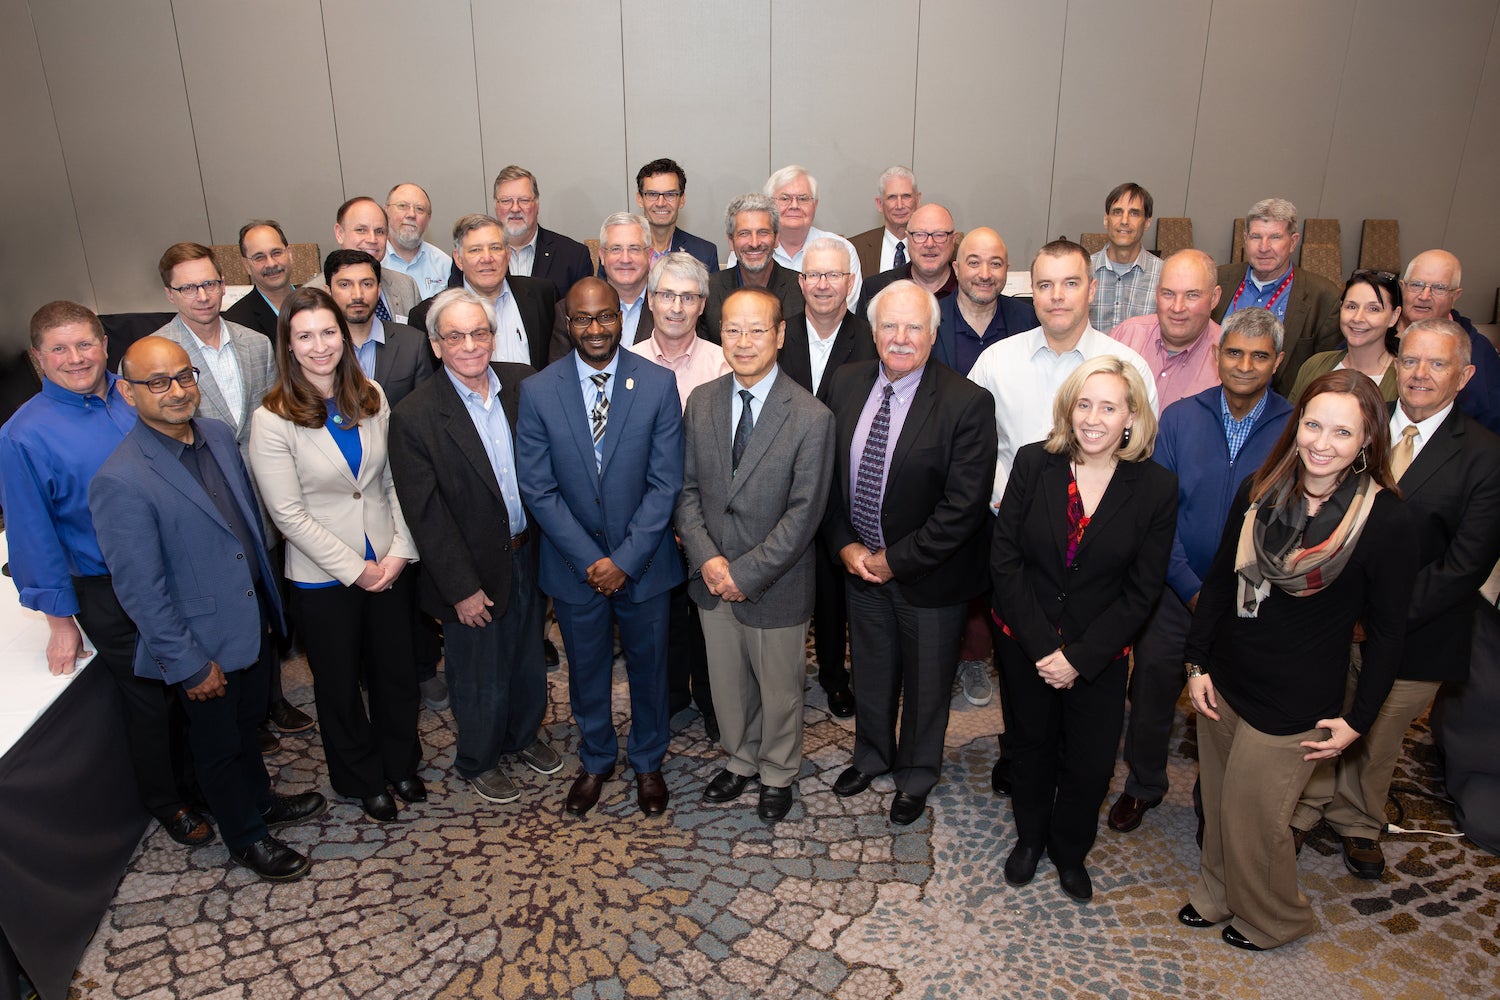 Group photo from the 2019 Annual Fire Council Meeting